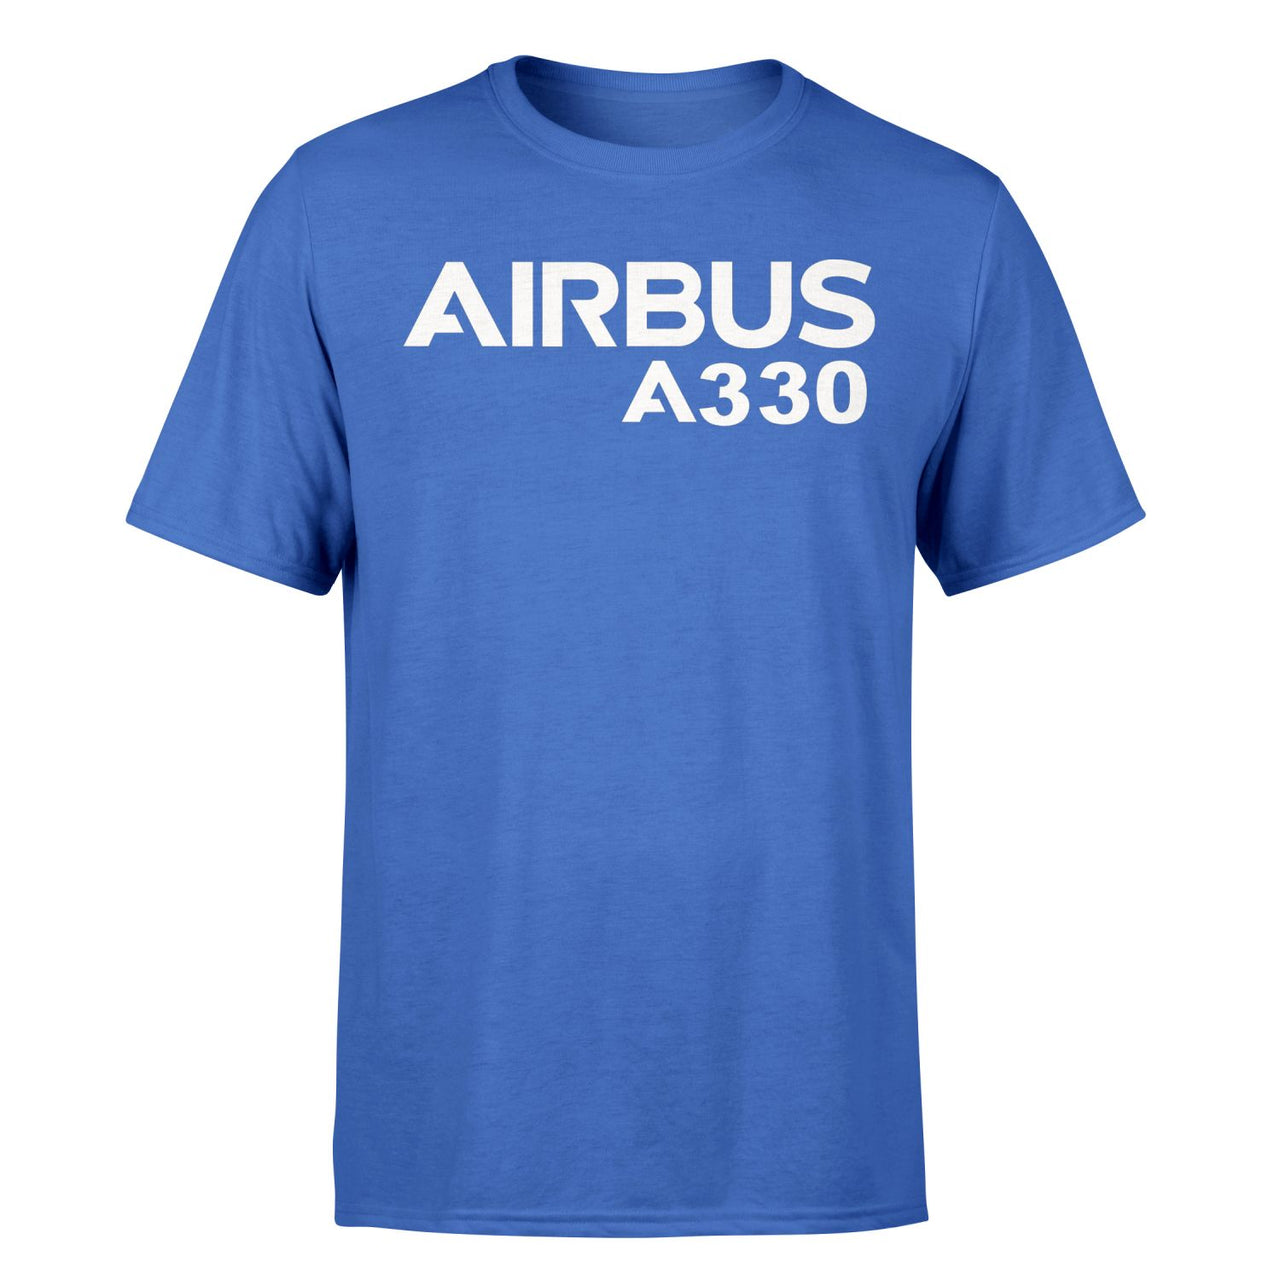 Airbus A330 & Text Designed T-Shirts